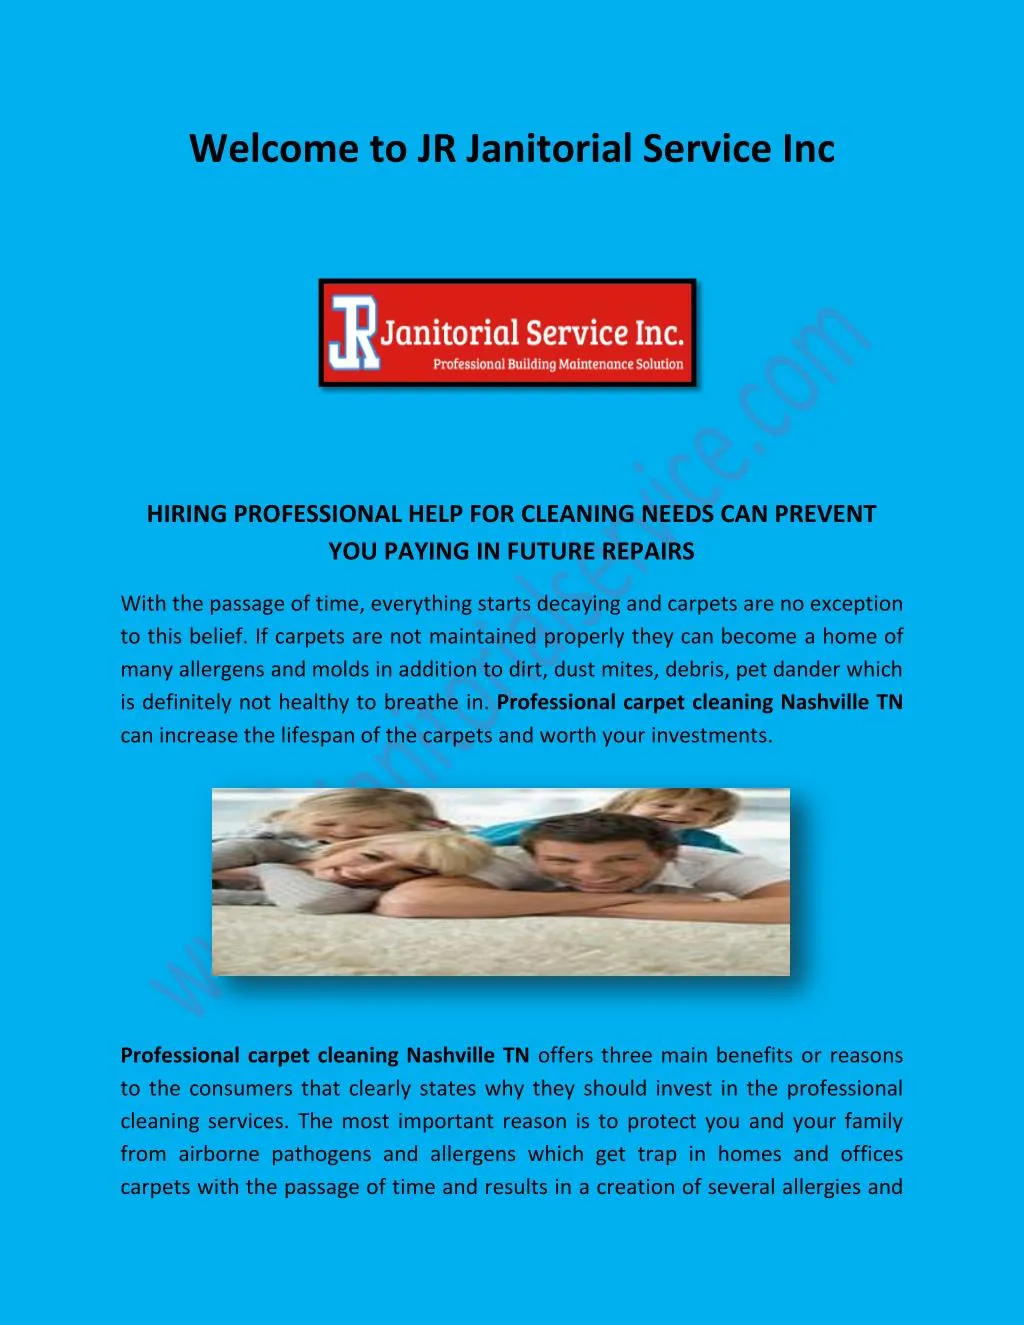 welcome to jr janitorial service inc